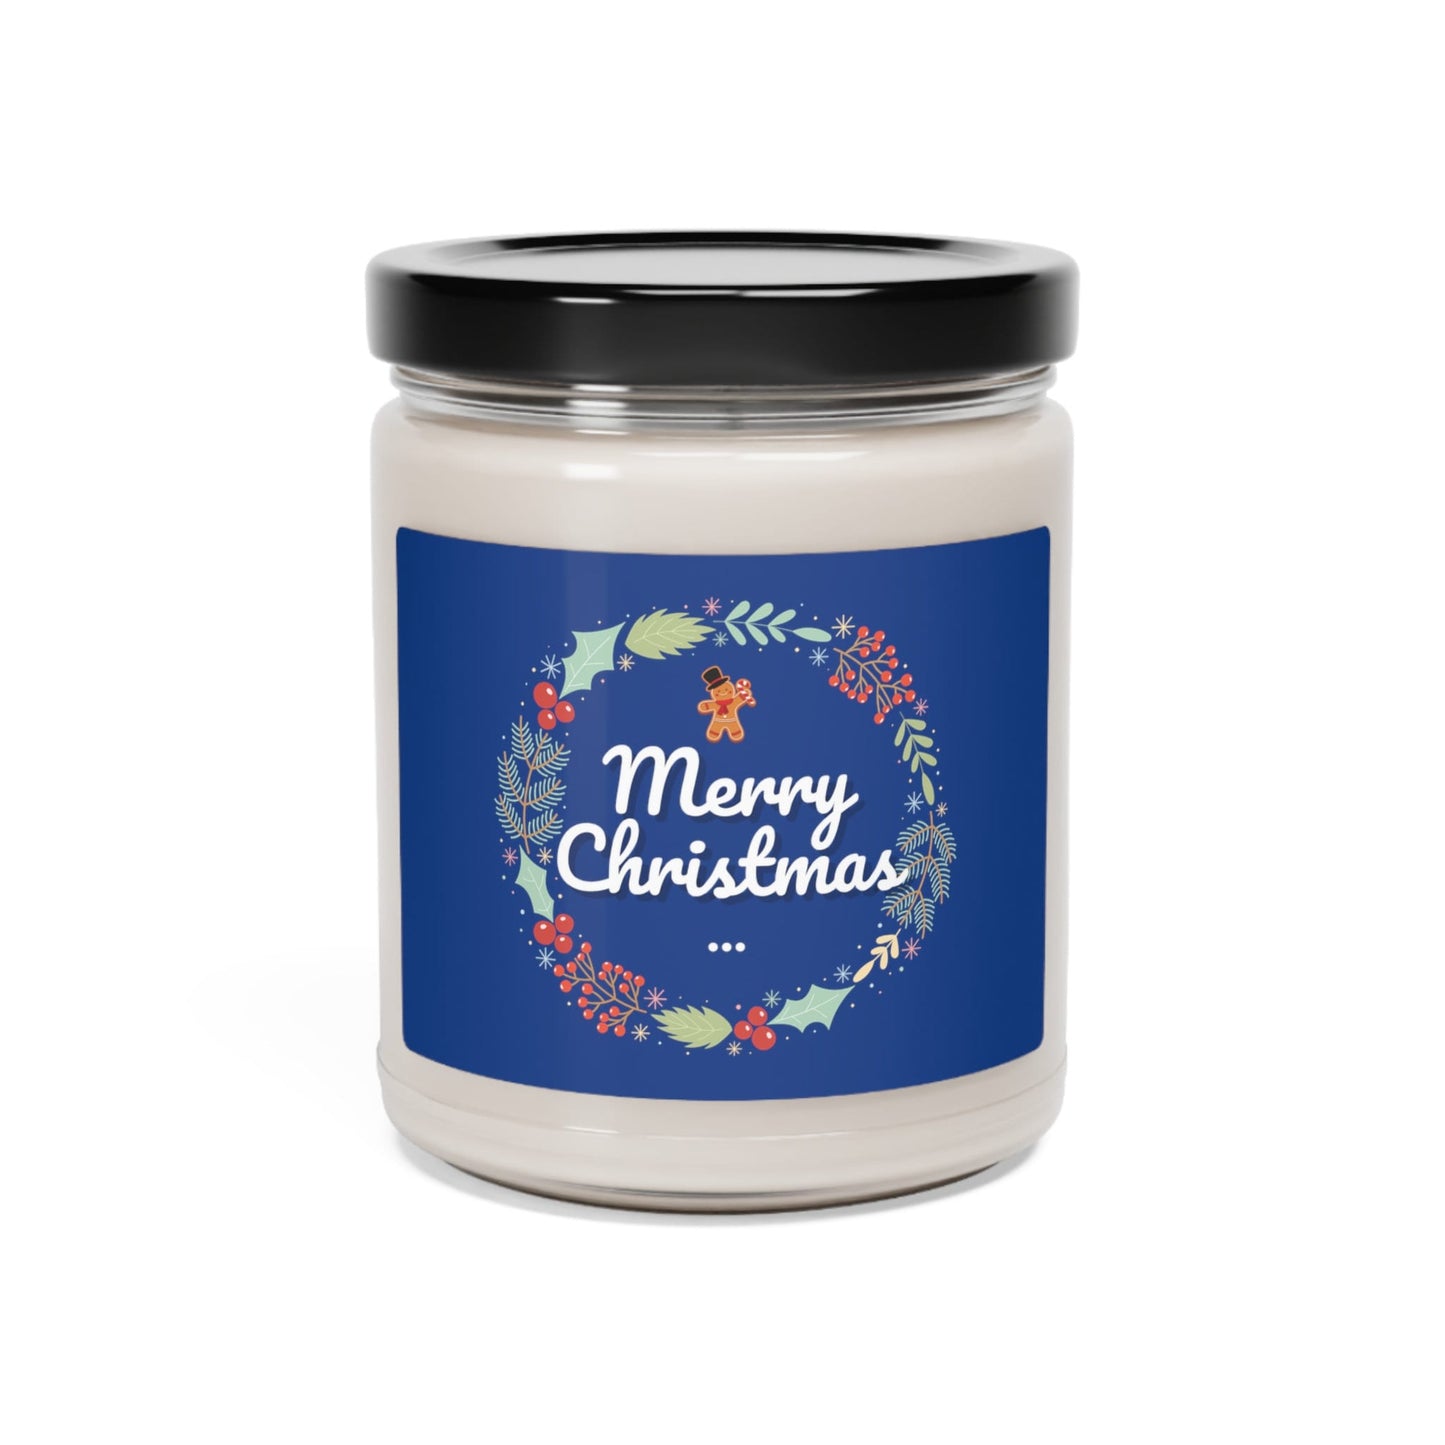 Merry Christmas Gingerbread Man Scented Soy Candle, 9oz